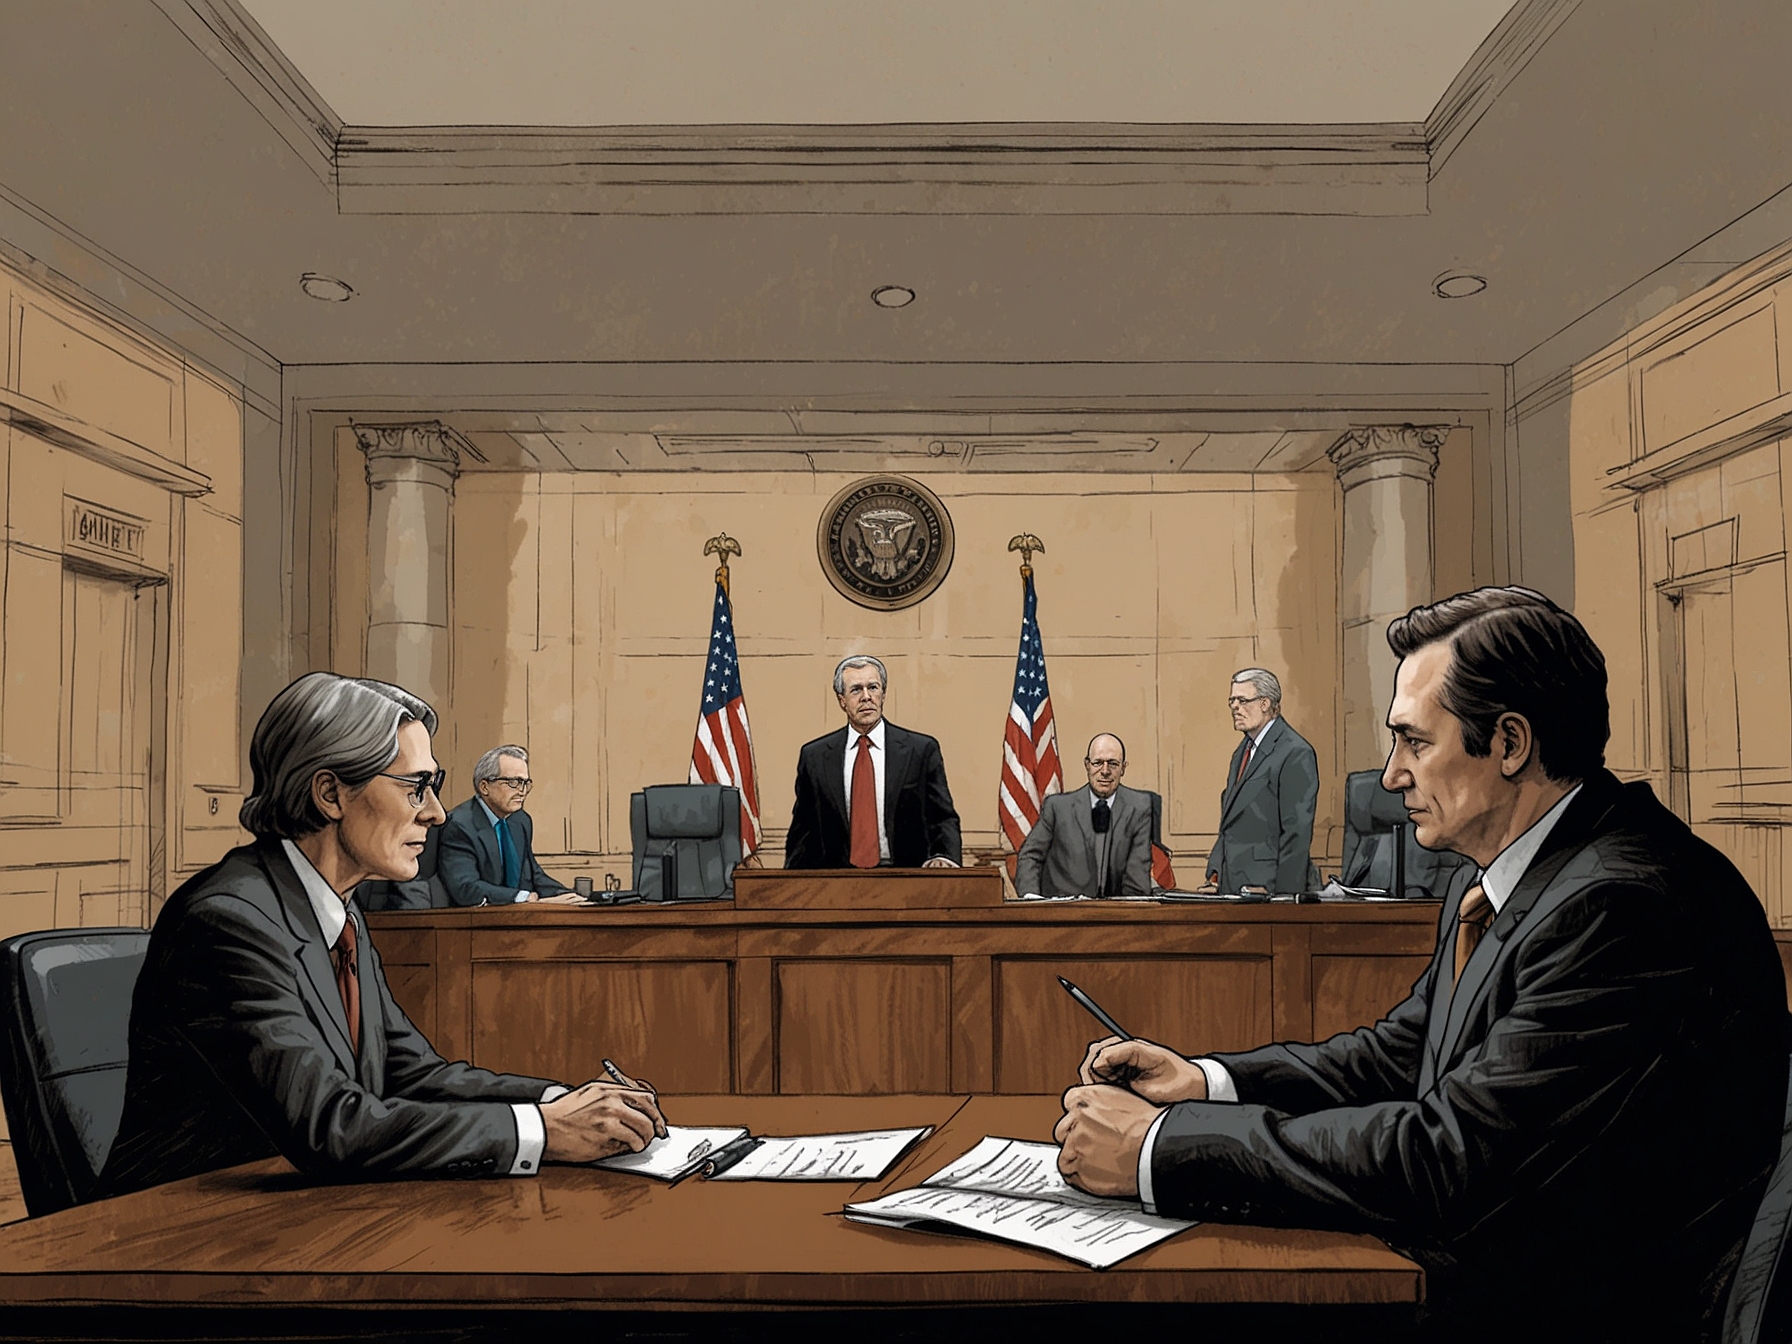 A courtroom illustration with lawyers and Boeing representatives, symbolizing the legal battle and the Justice Department's push for Boeing to enter a guilty plea for regulatory violations.